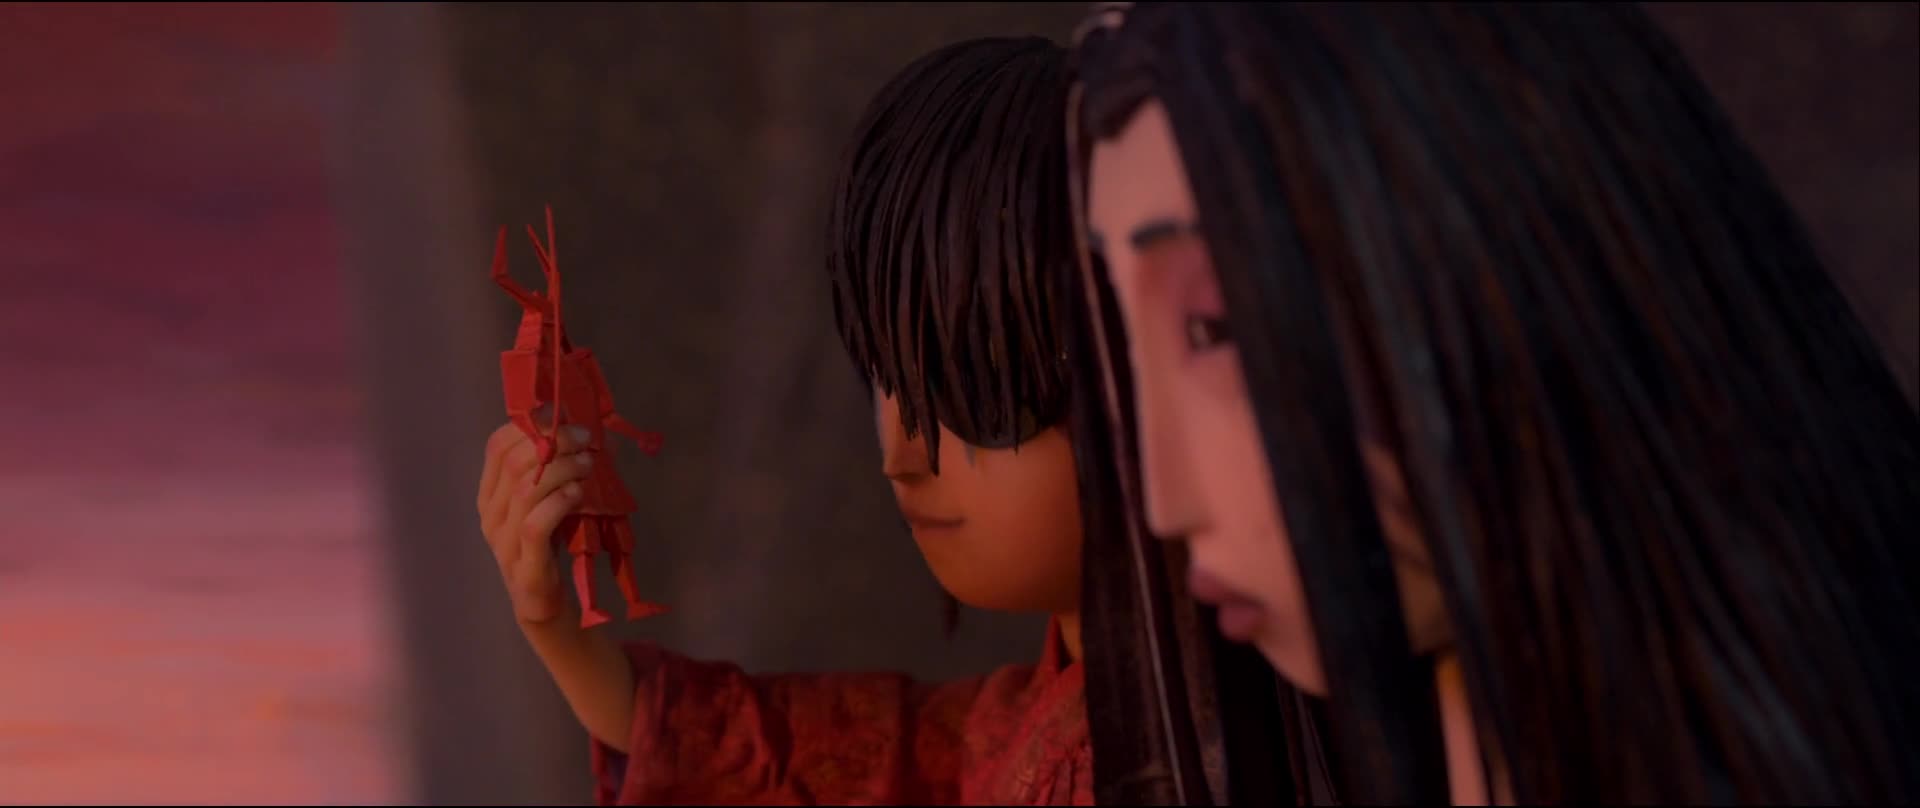 Kubo a kouzelny mec Kubo And The Two Strings 2016 1080p BRRip x264 AAC ETRG